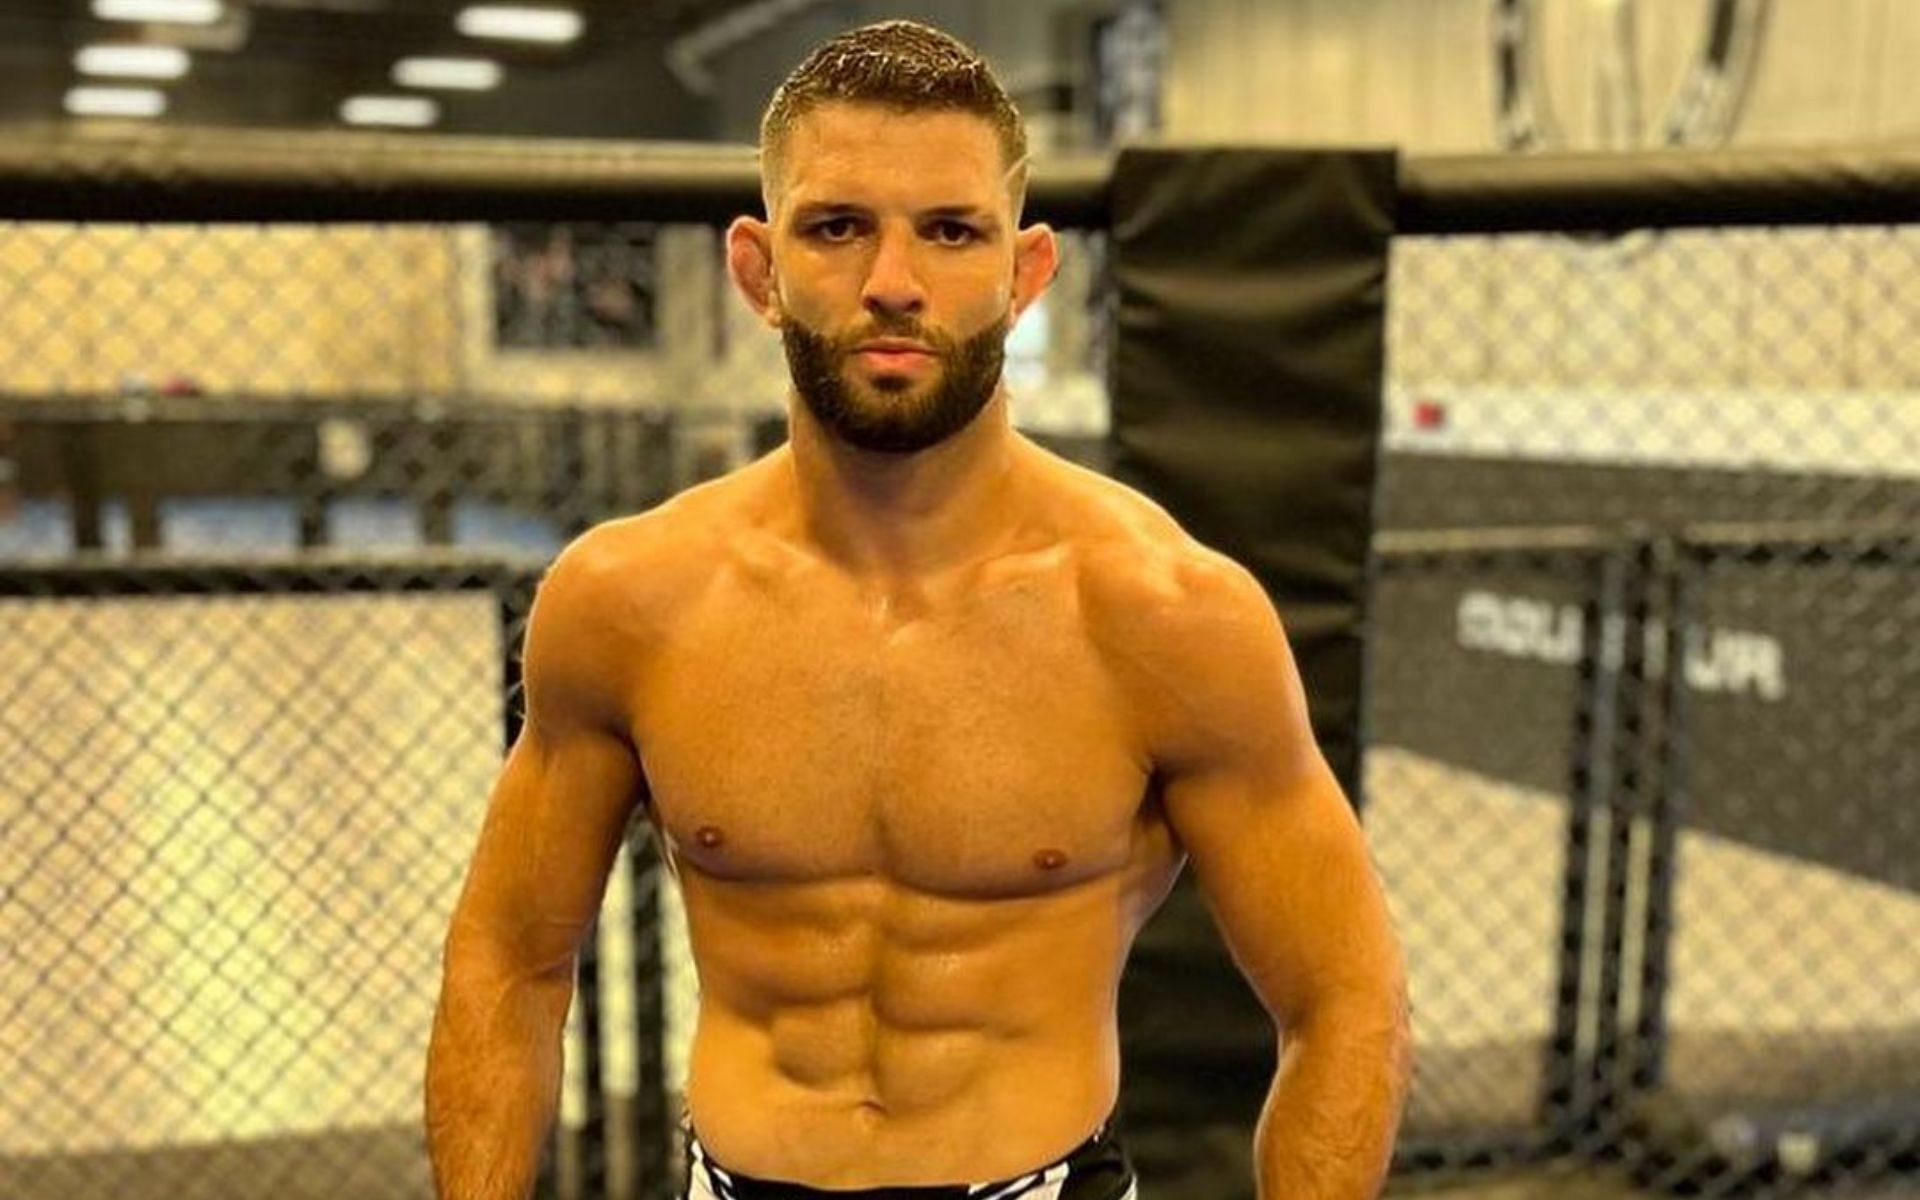 UFC lightweight fighter Thiago Moises shares &quot;awkward&quot; bathroom incident with anti-doping agent